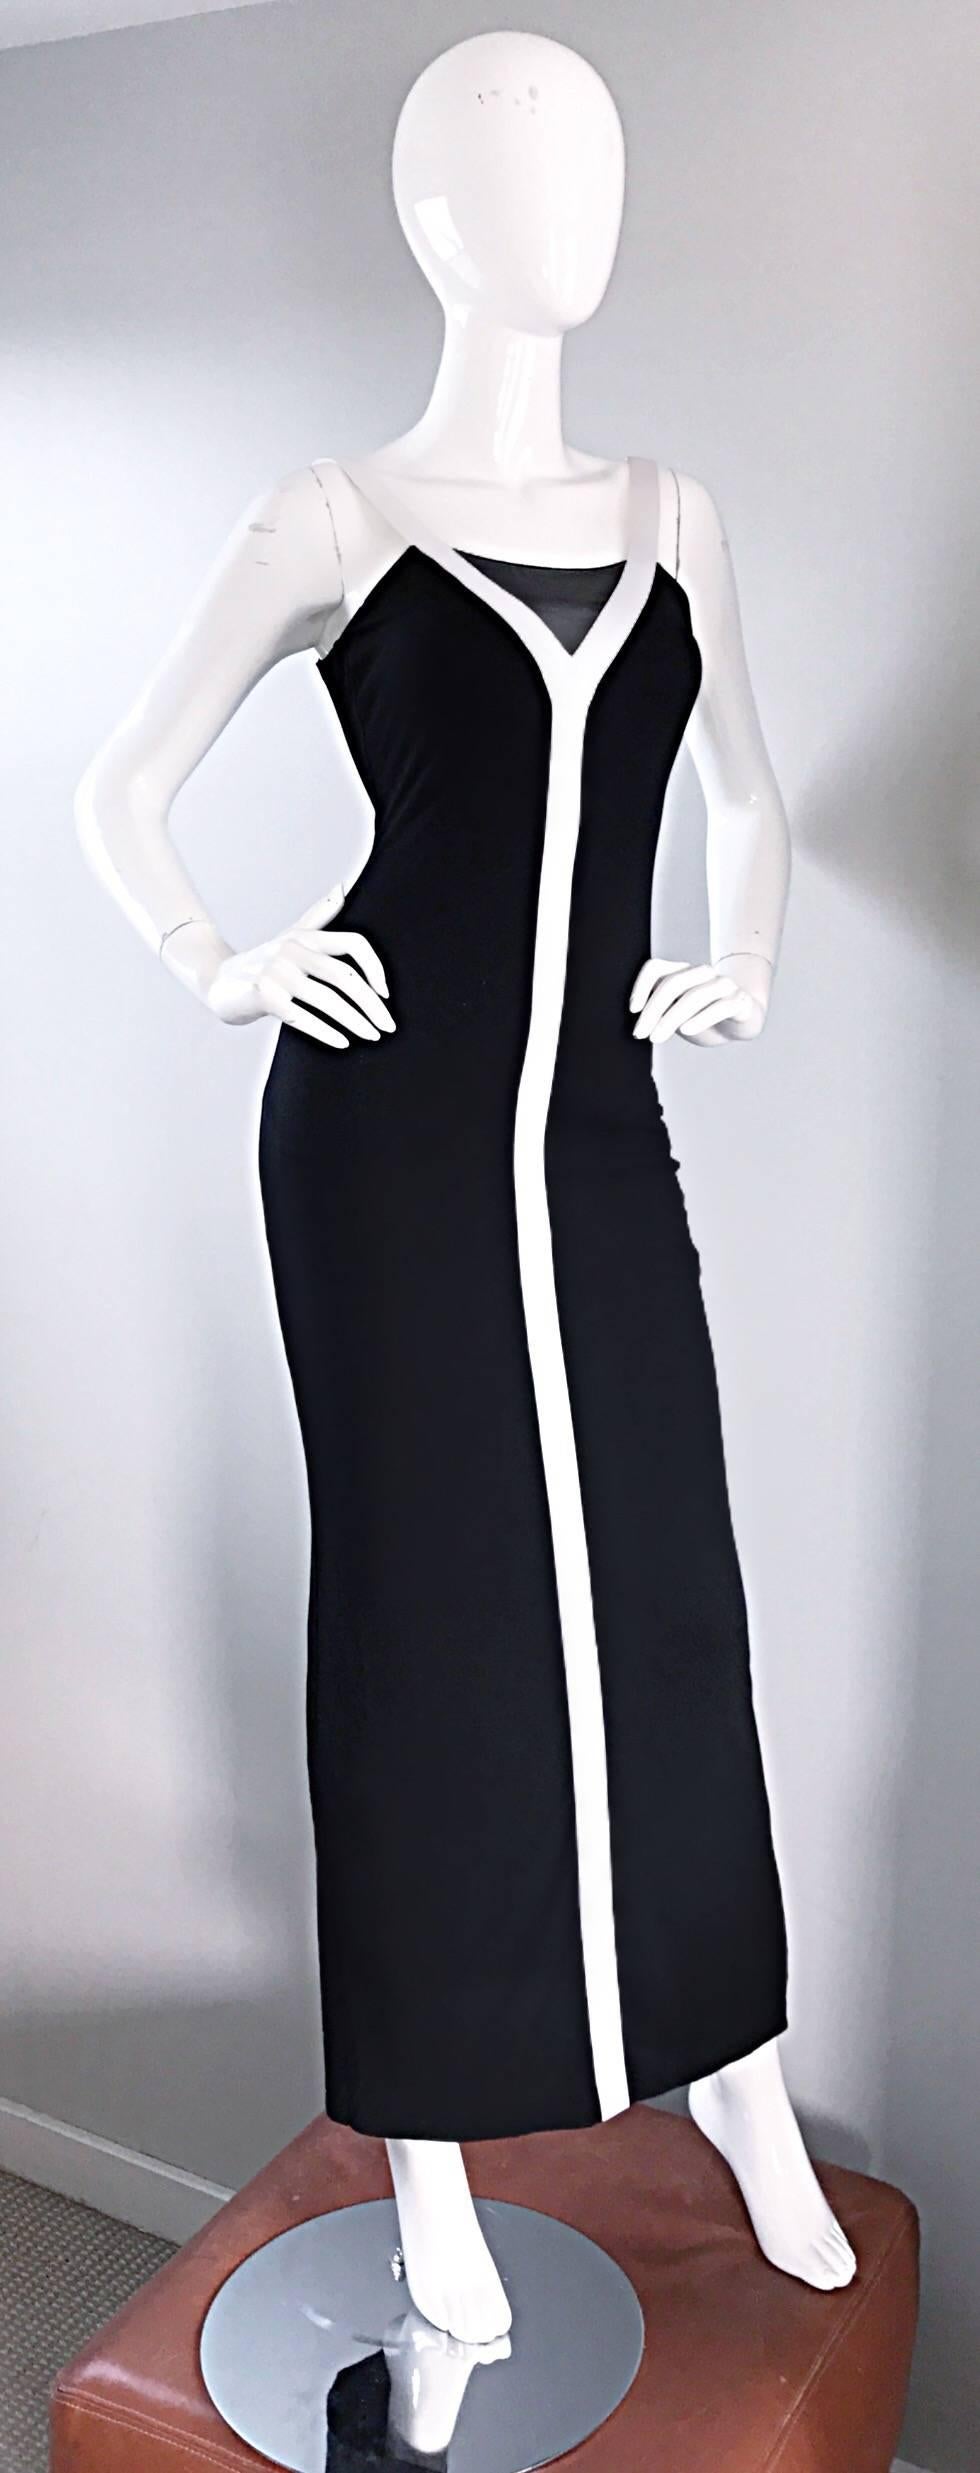 Women's Dolce & Gabbana 1990s Vintage Black and White Iconic Jersey Dress Gown Dress For Sale